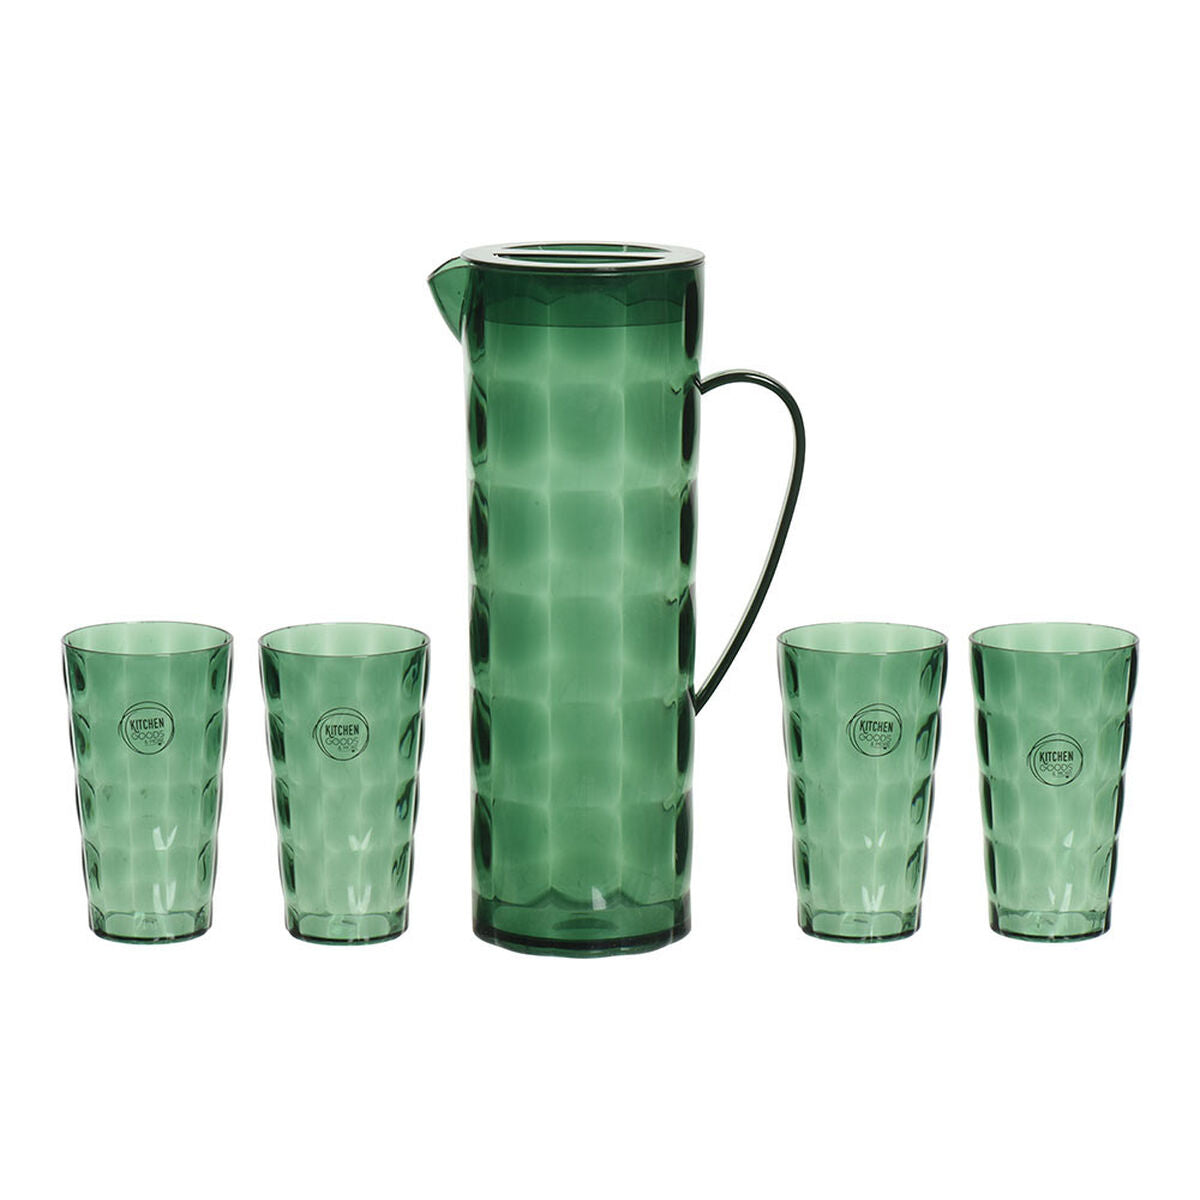 Jug and glasses set EDM 827051 Recycled plastic (5 Pieces)